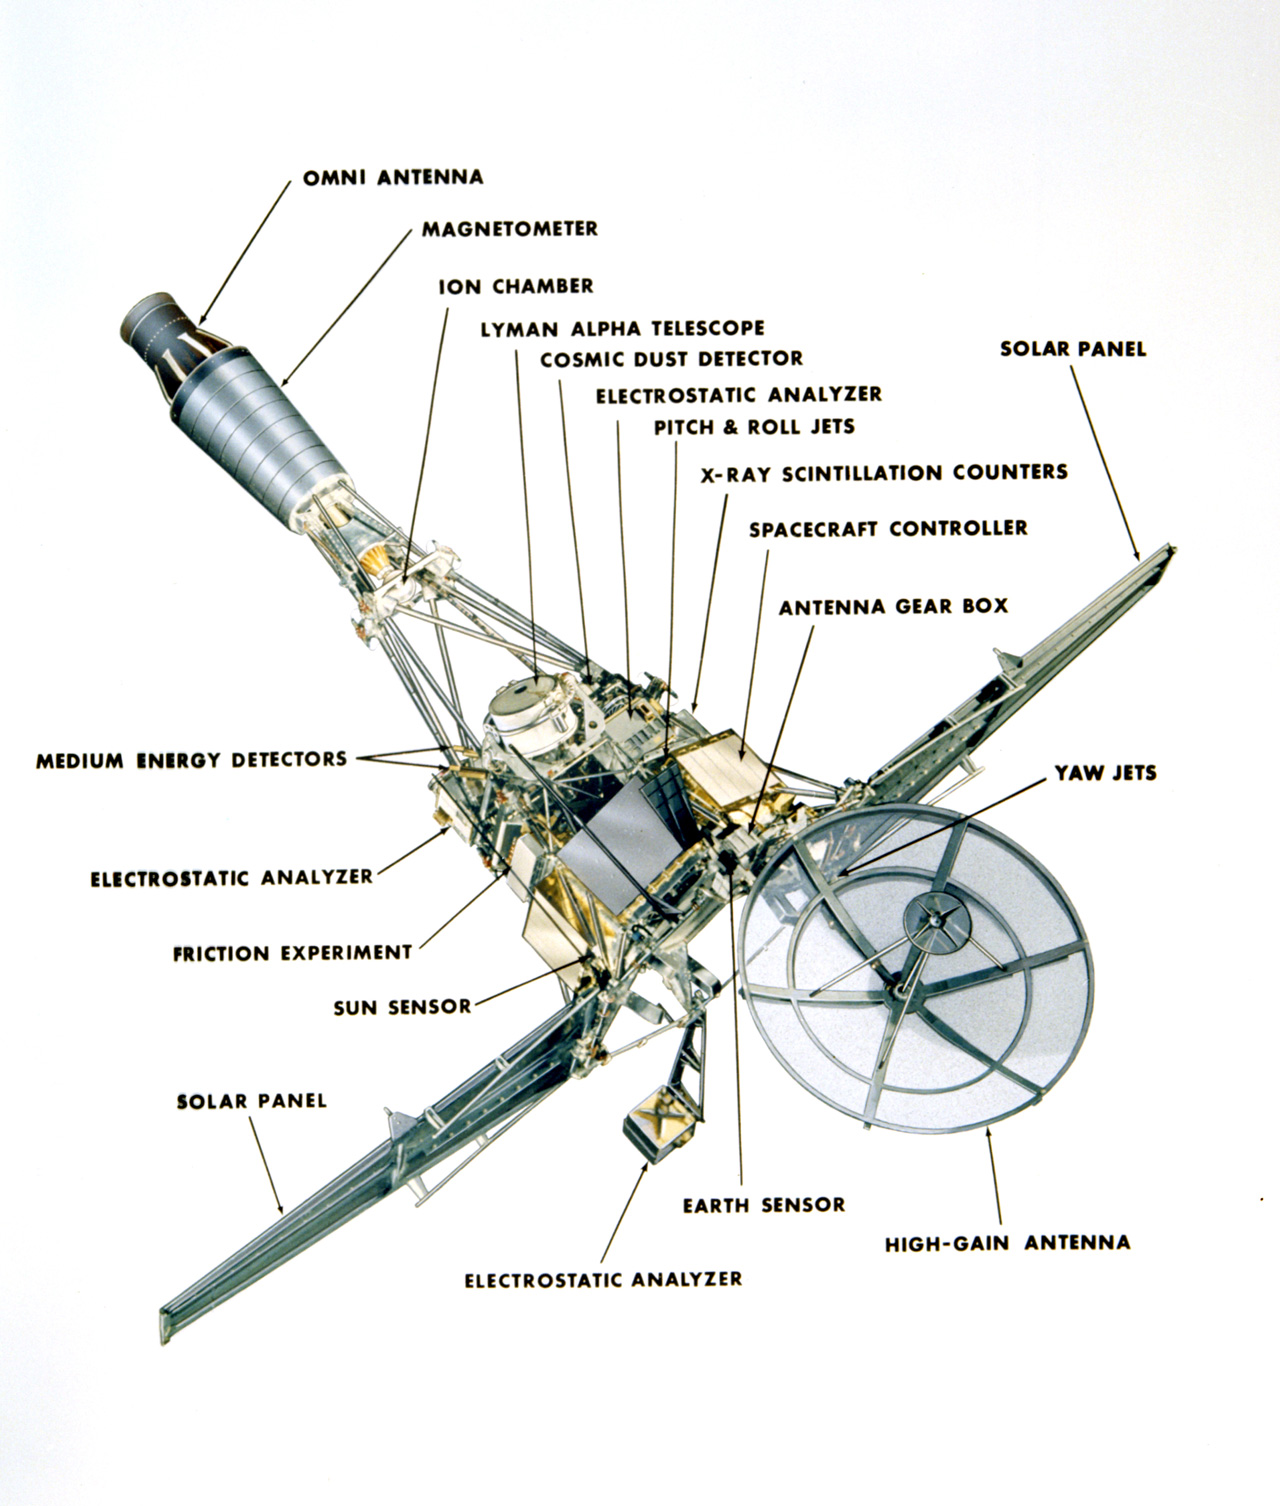 Labeled version of spacecraft model.